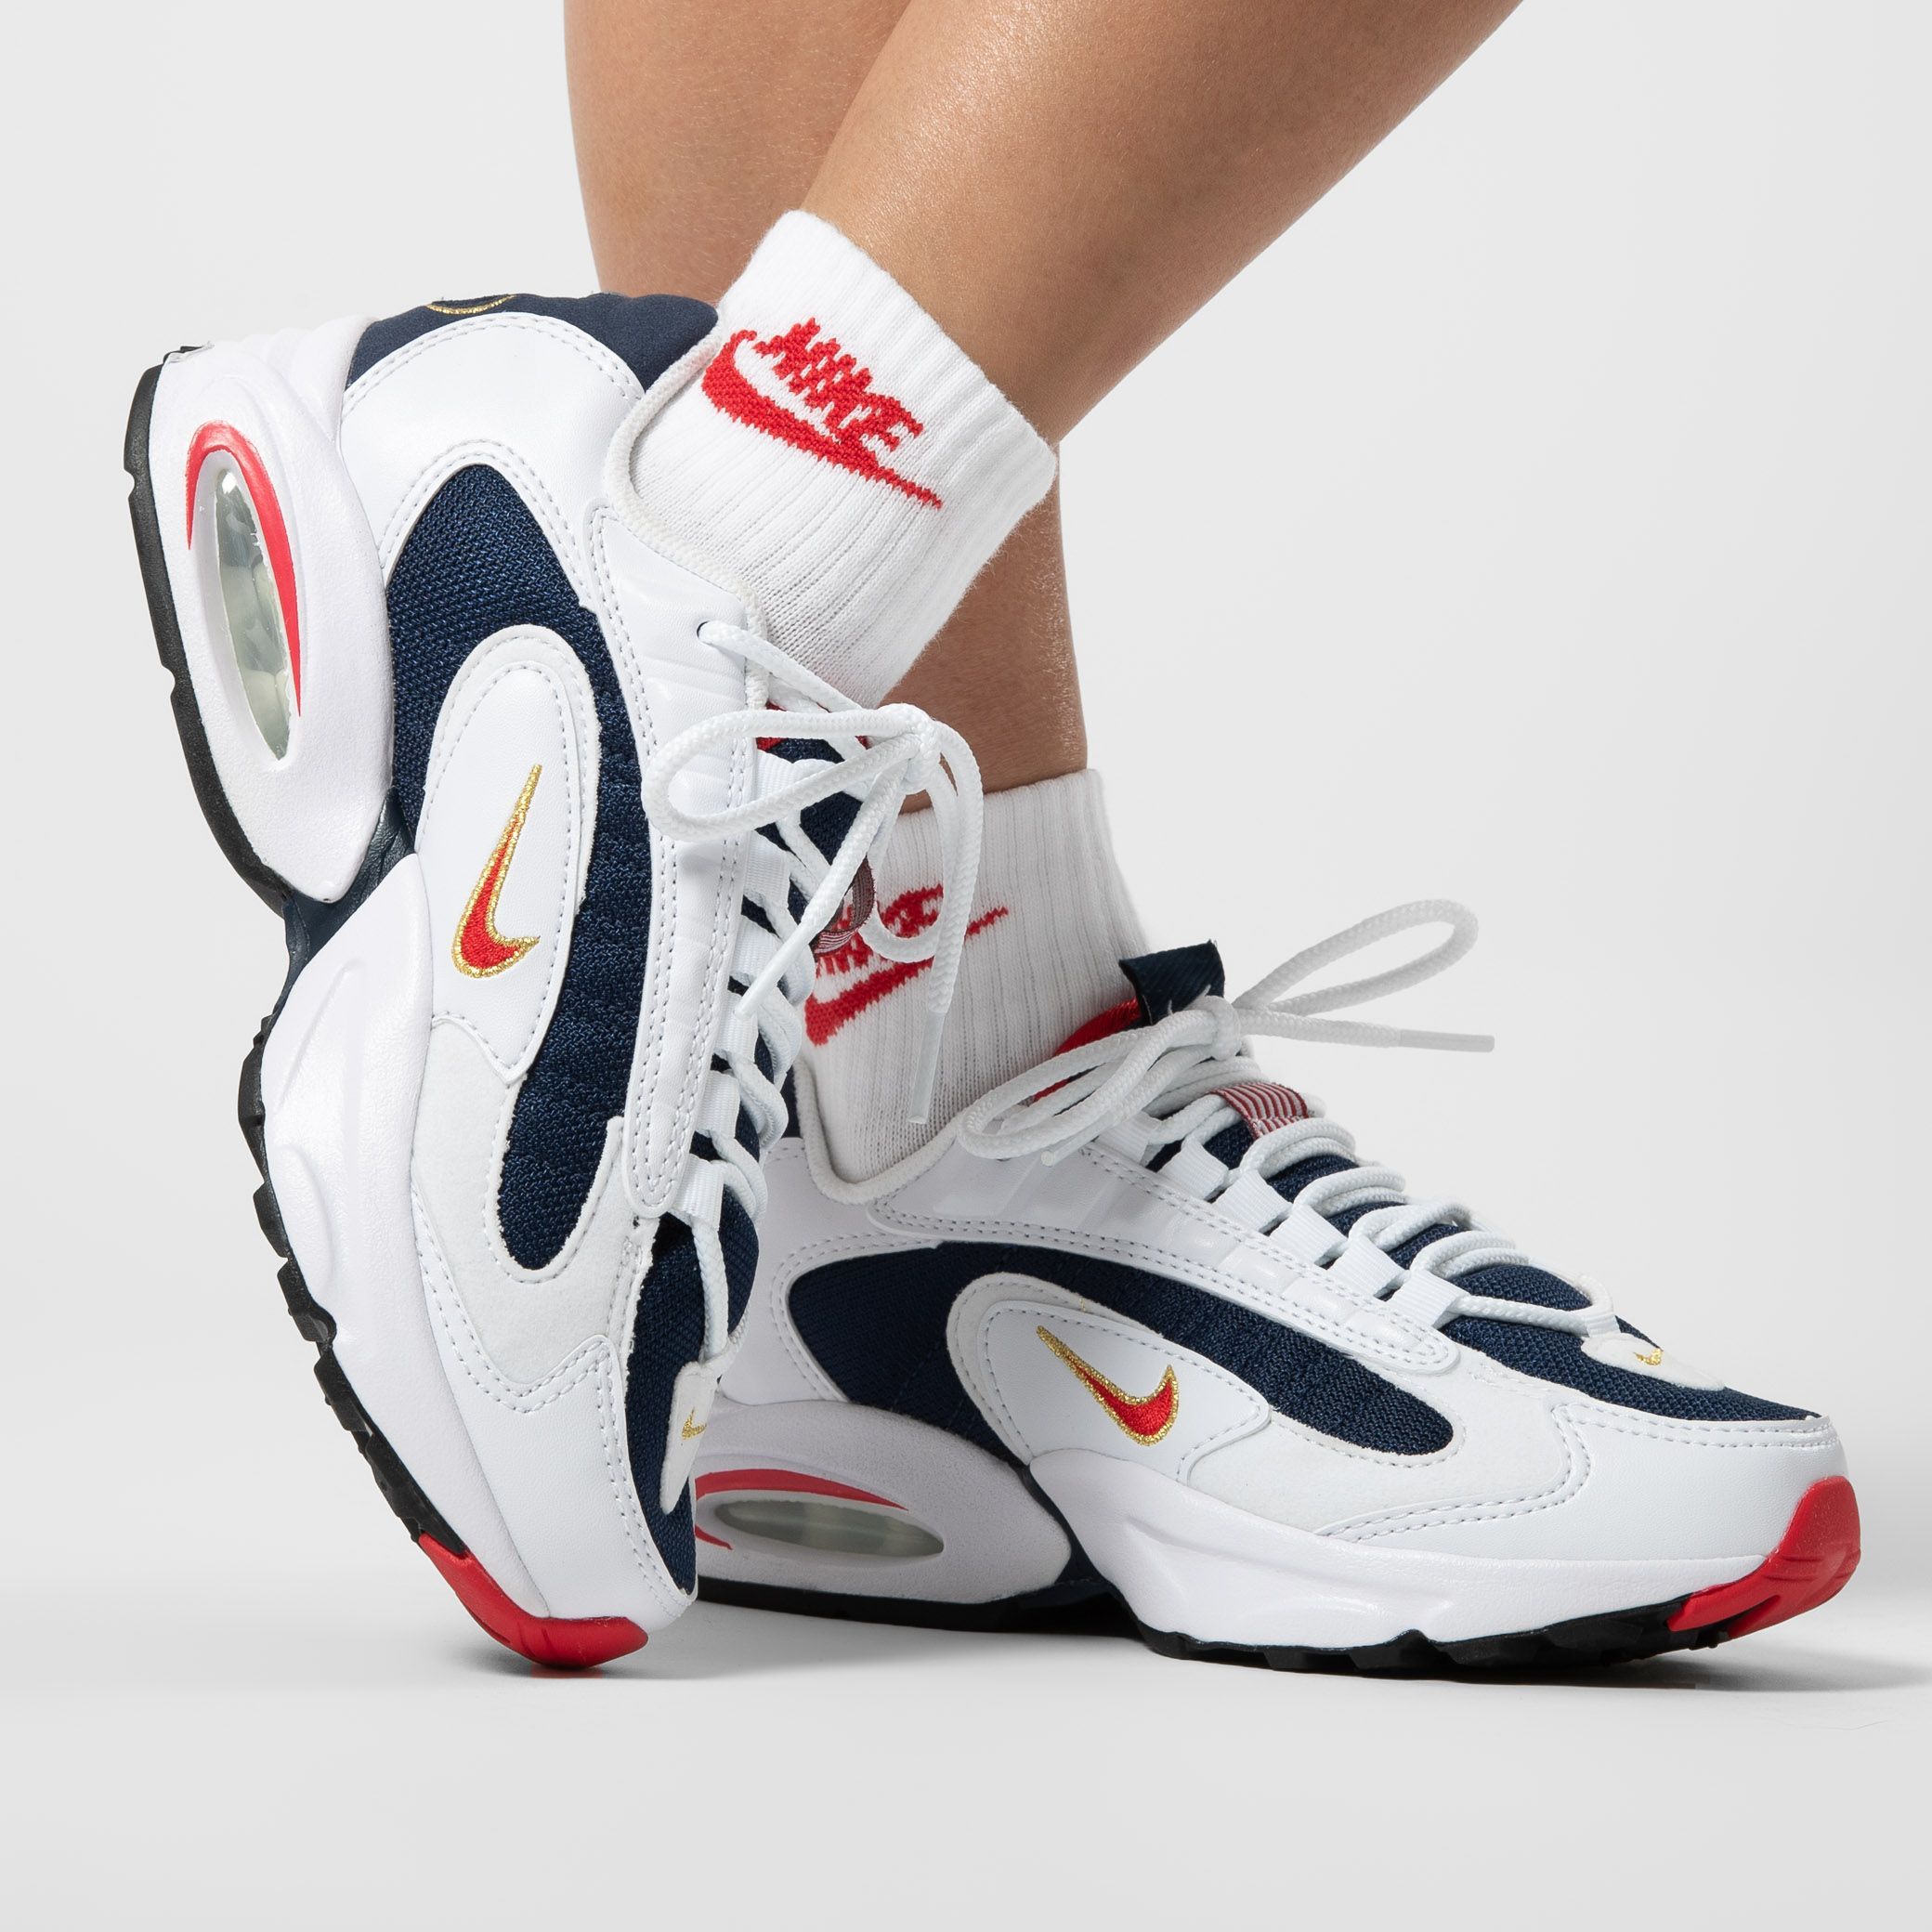 Orgullo aniversario Asentar Titolo on Twitter: "⁠put your🏅medal on! the Nike Air Max Triax 96 "USA  Olympics" is now also available in the wmns edition. Check it out ➡︎  https://t.co/uNh5piGAYj⁠ 🏅⠀⁠ ⁠⠀⁠ US 5.5 (36) -